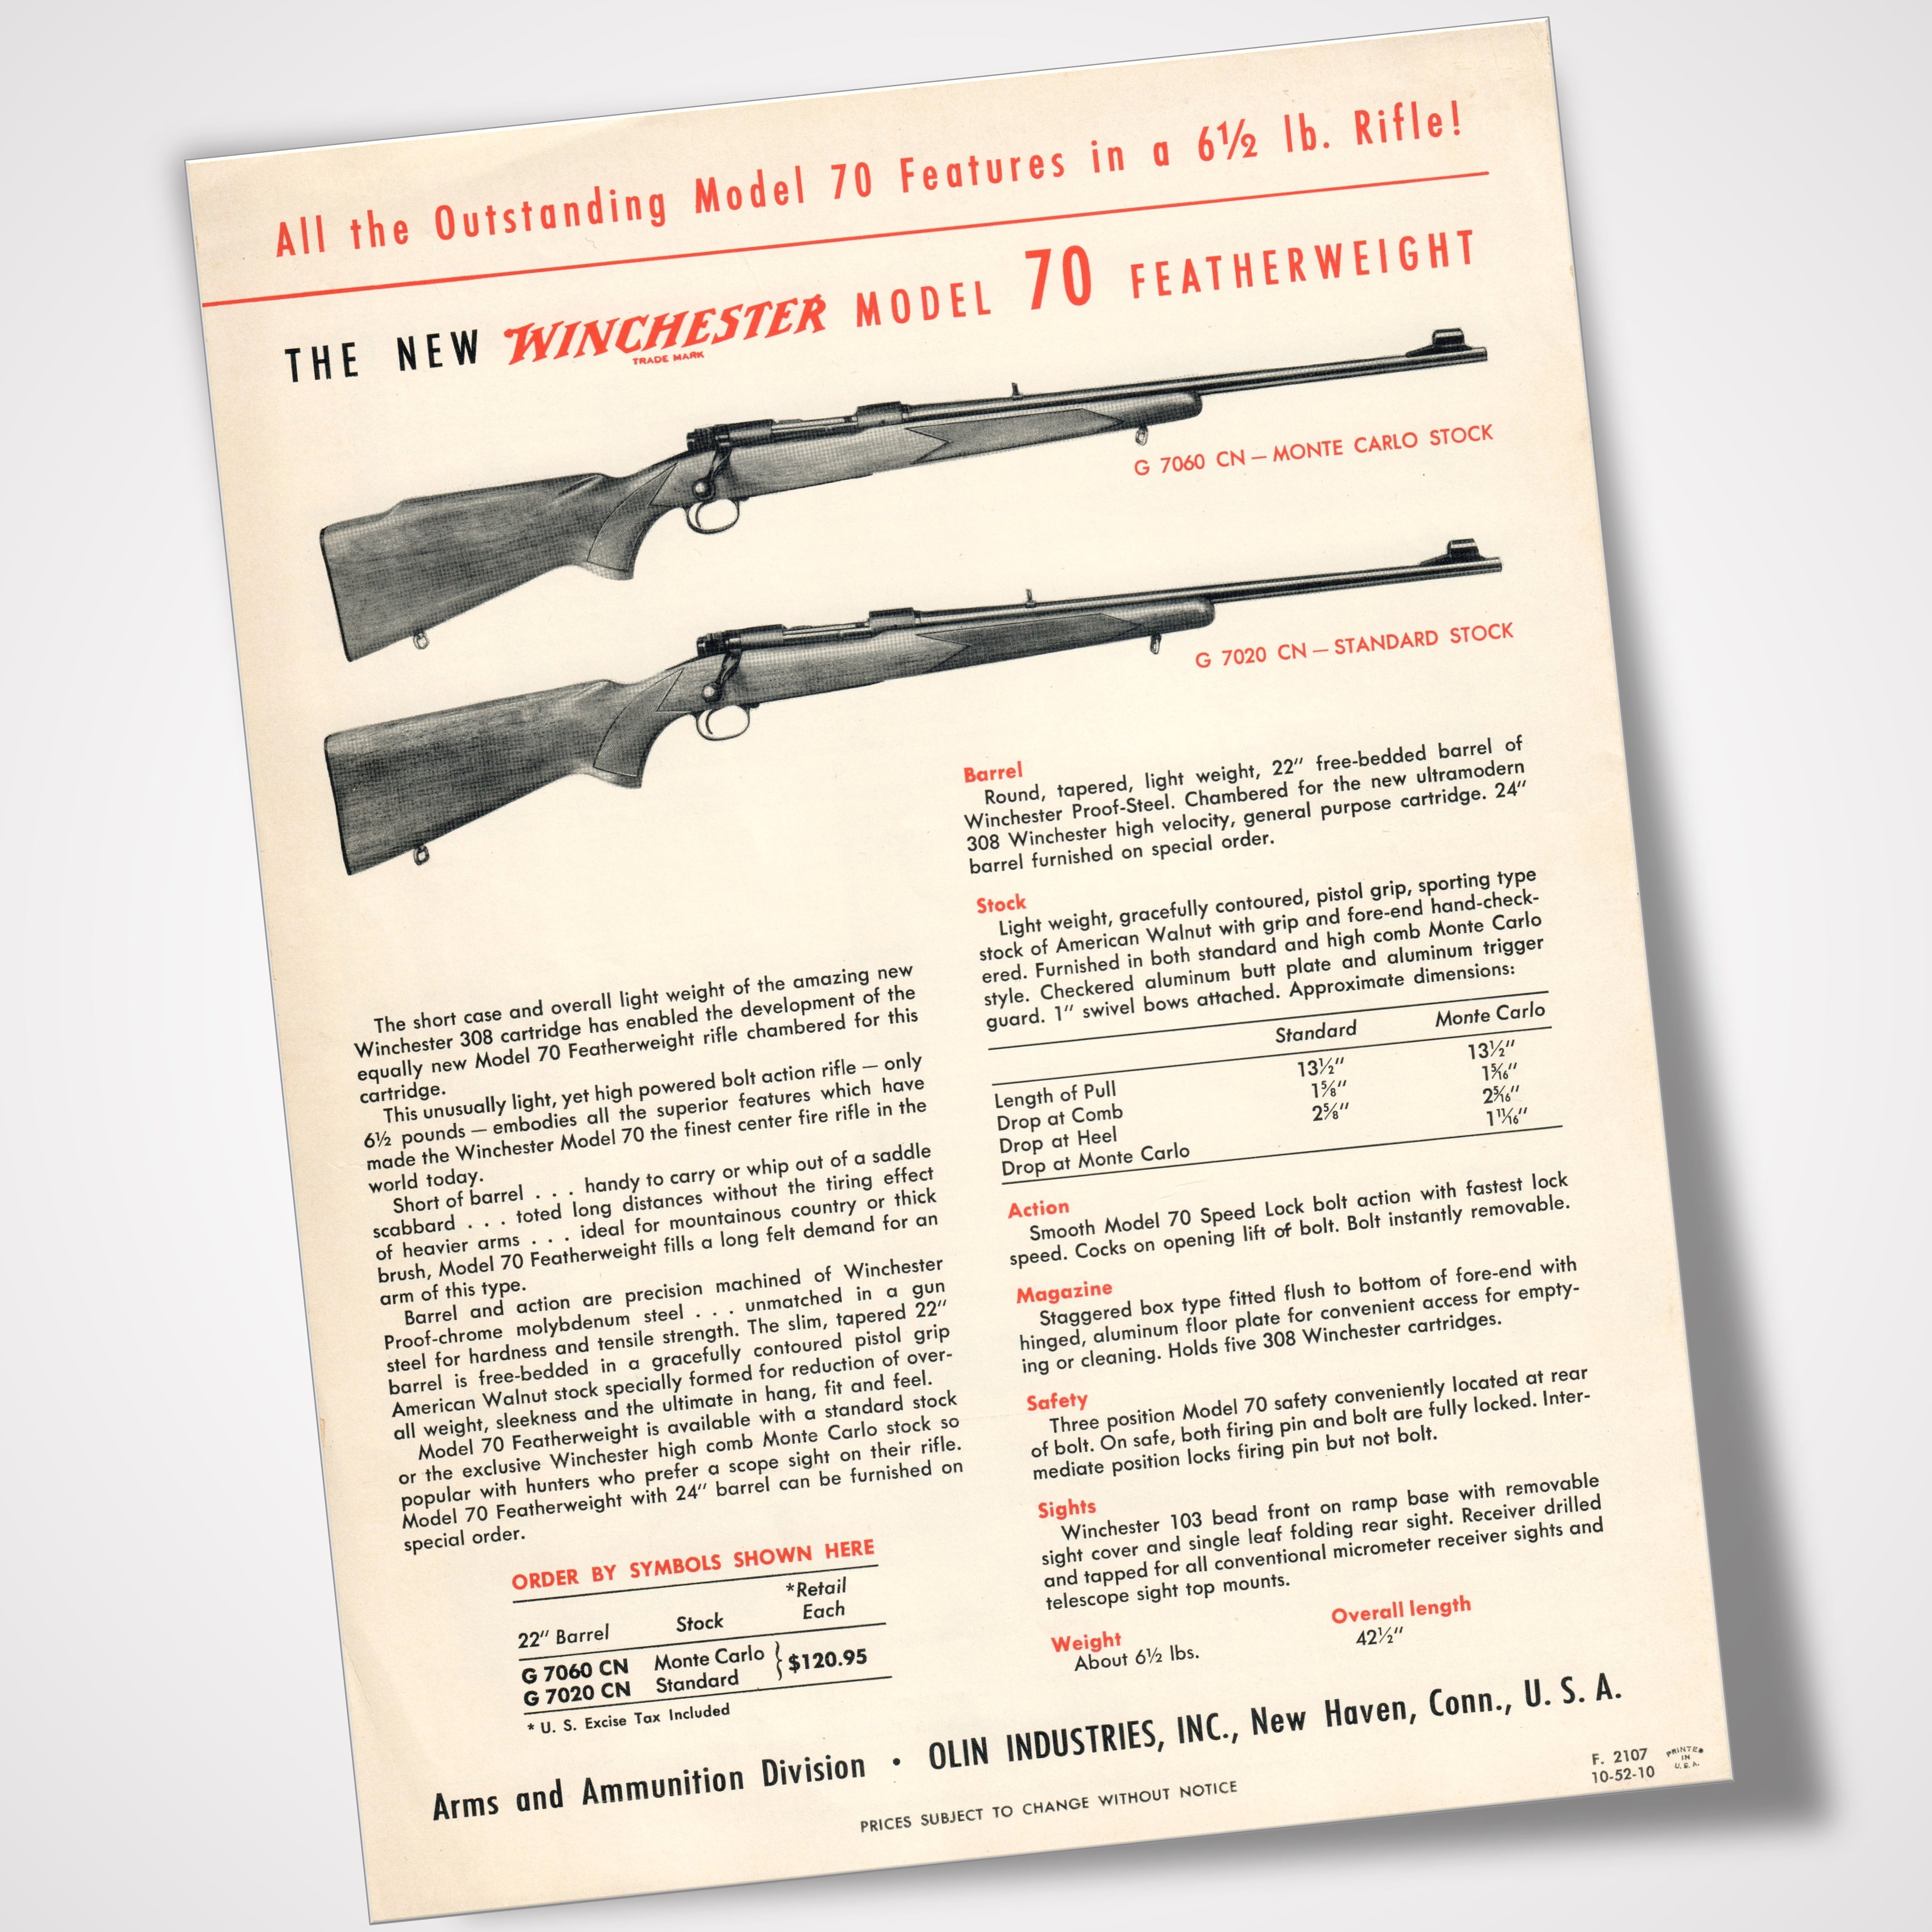 Complete Dealer Package - Winchester Model 70 Featherweight & 308 Win Cartridge Introduction